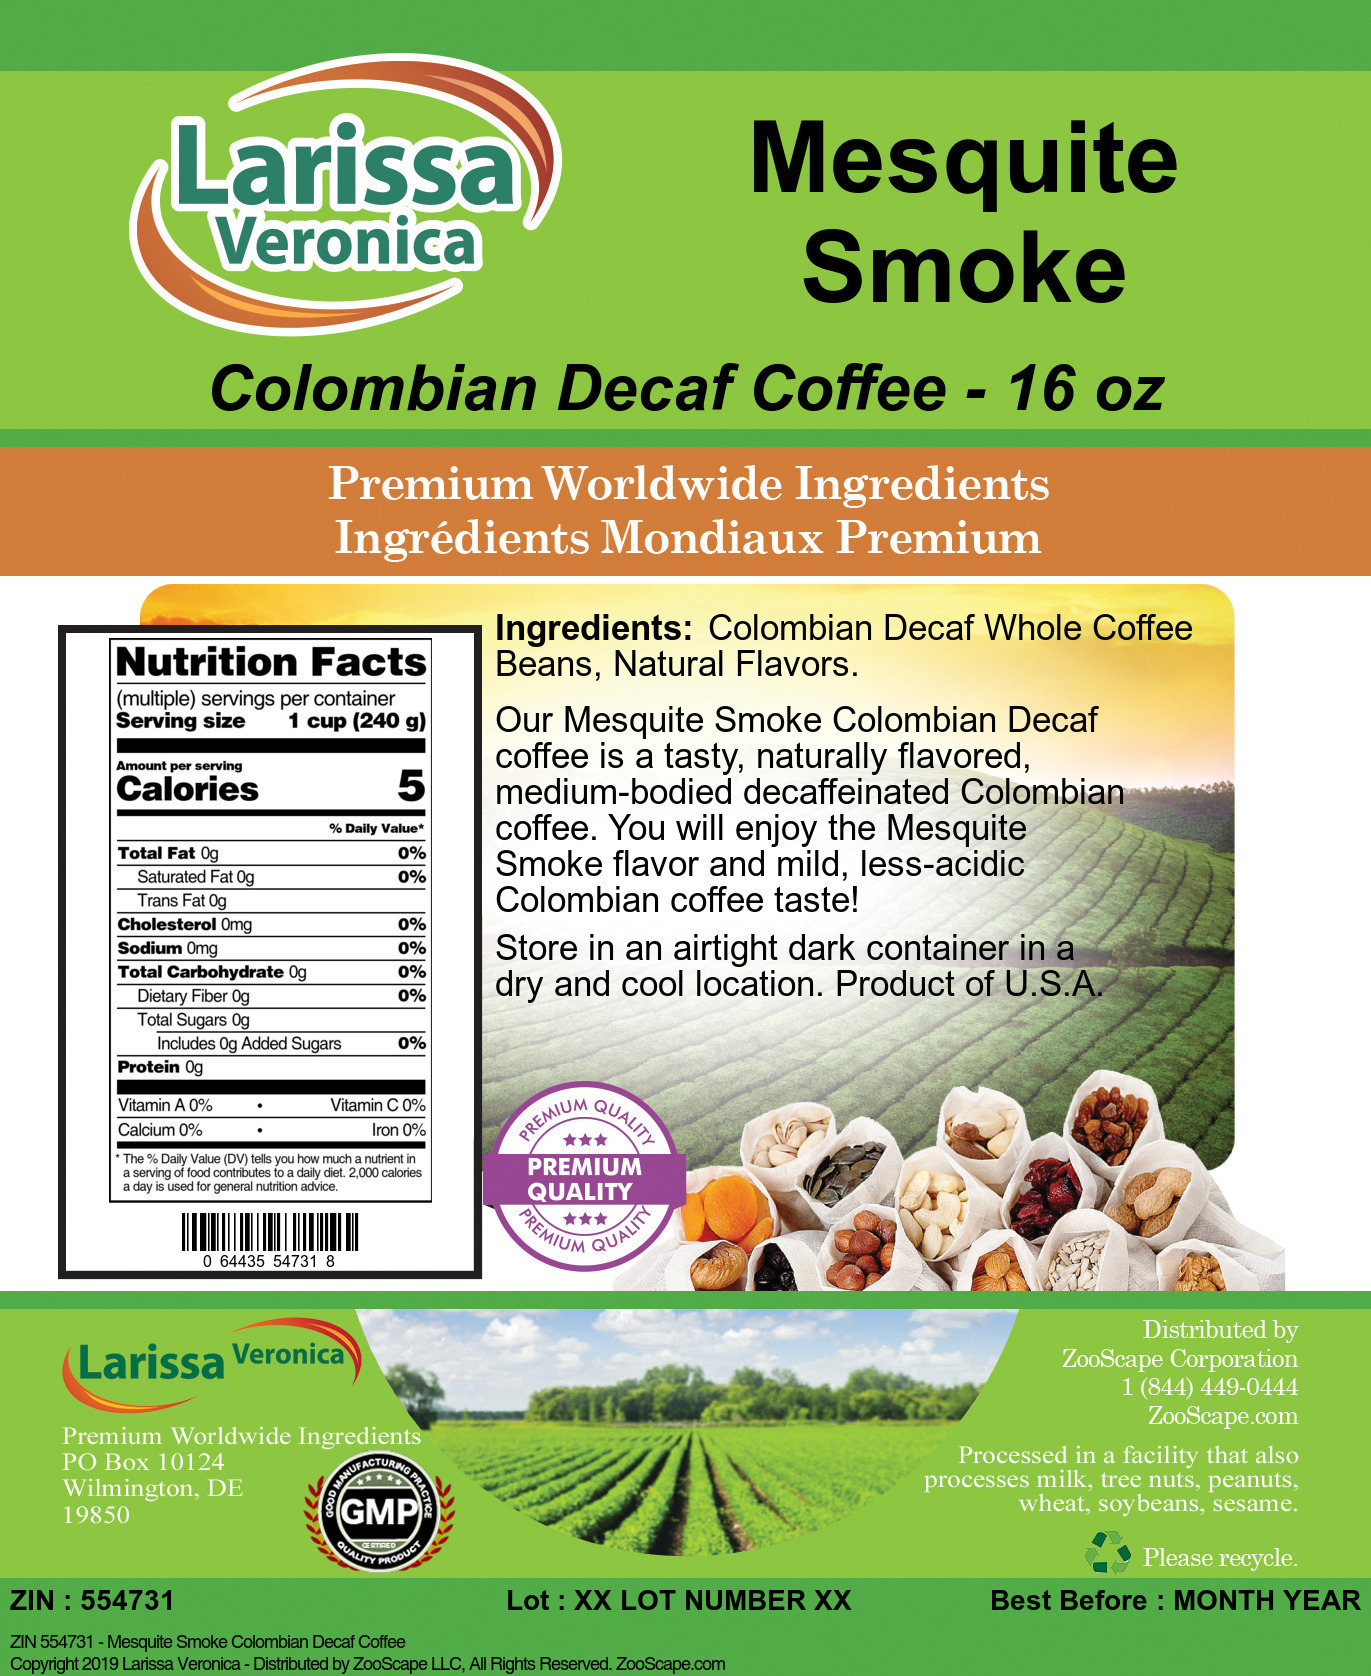 Mesquite Smoke Colombian Decaf Coffee - Label